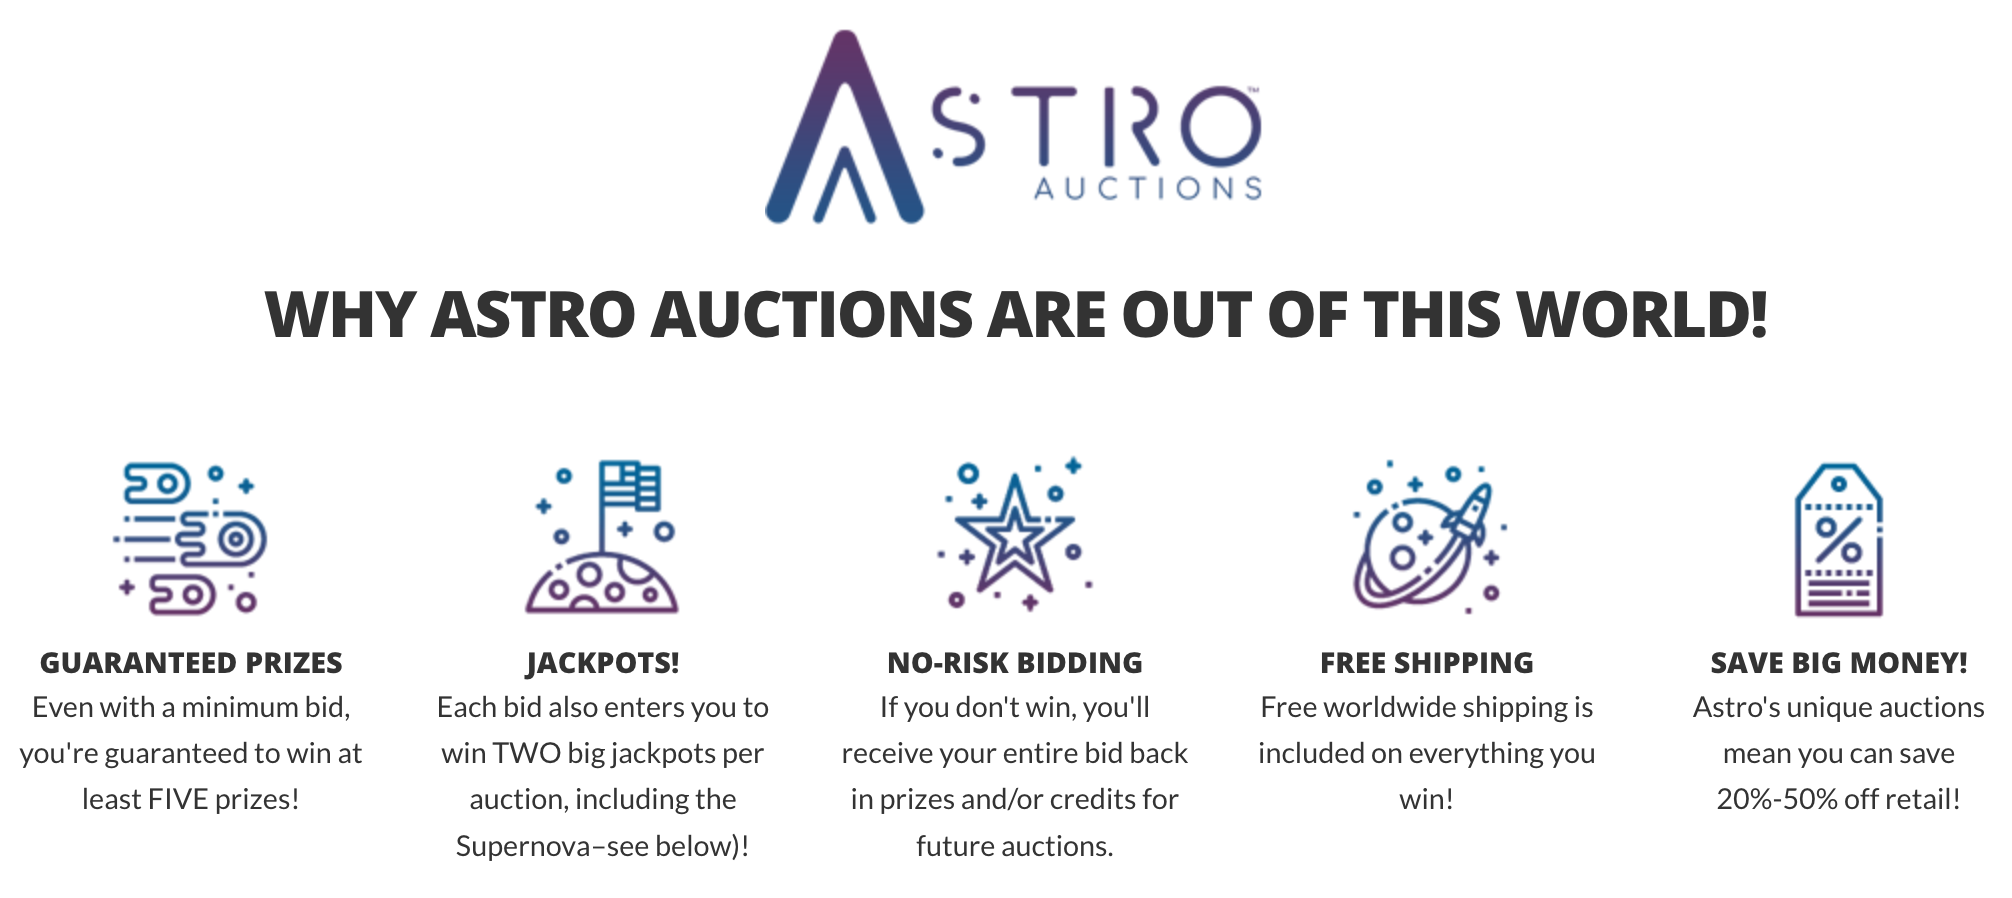 Astro Auctions...one bid and done!